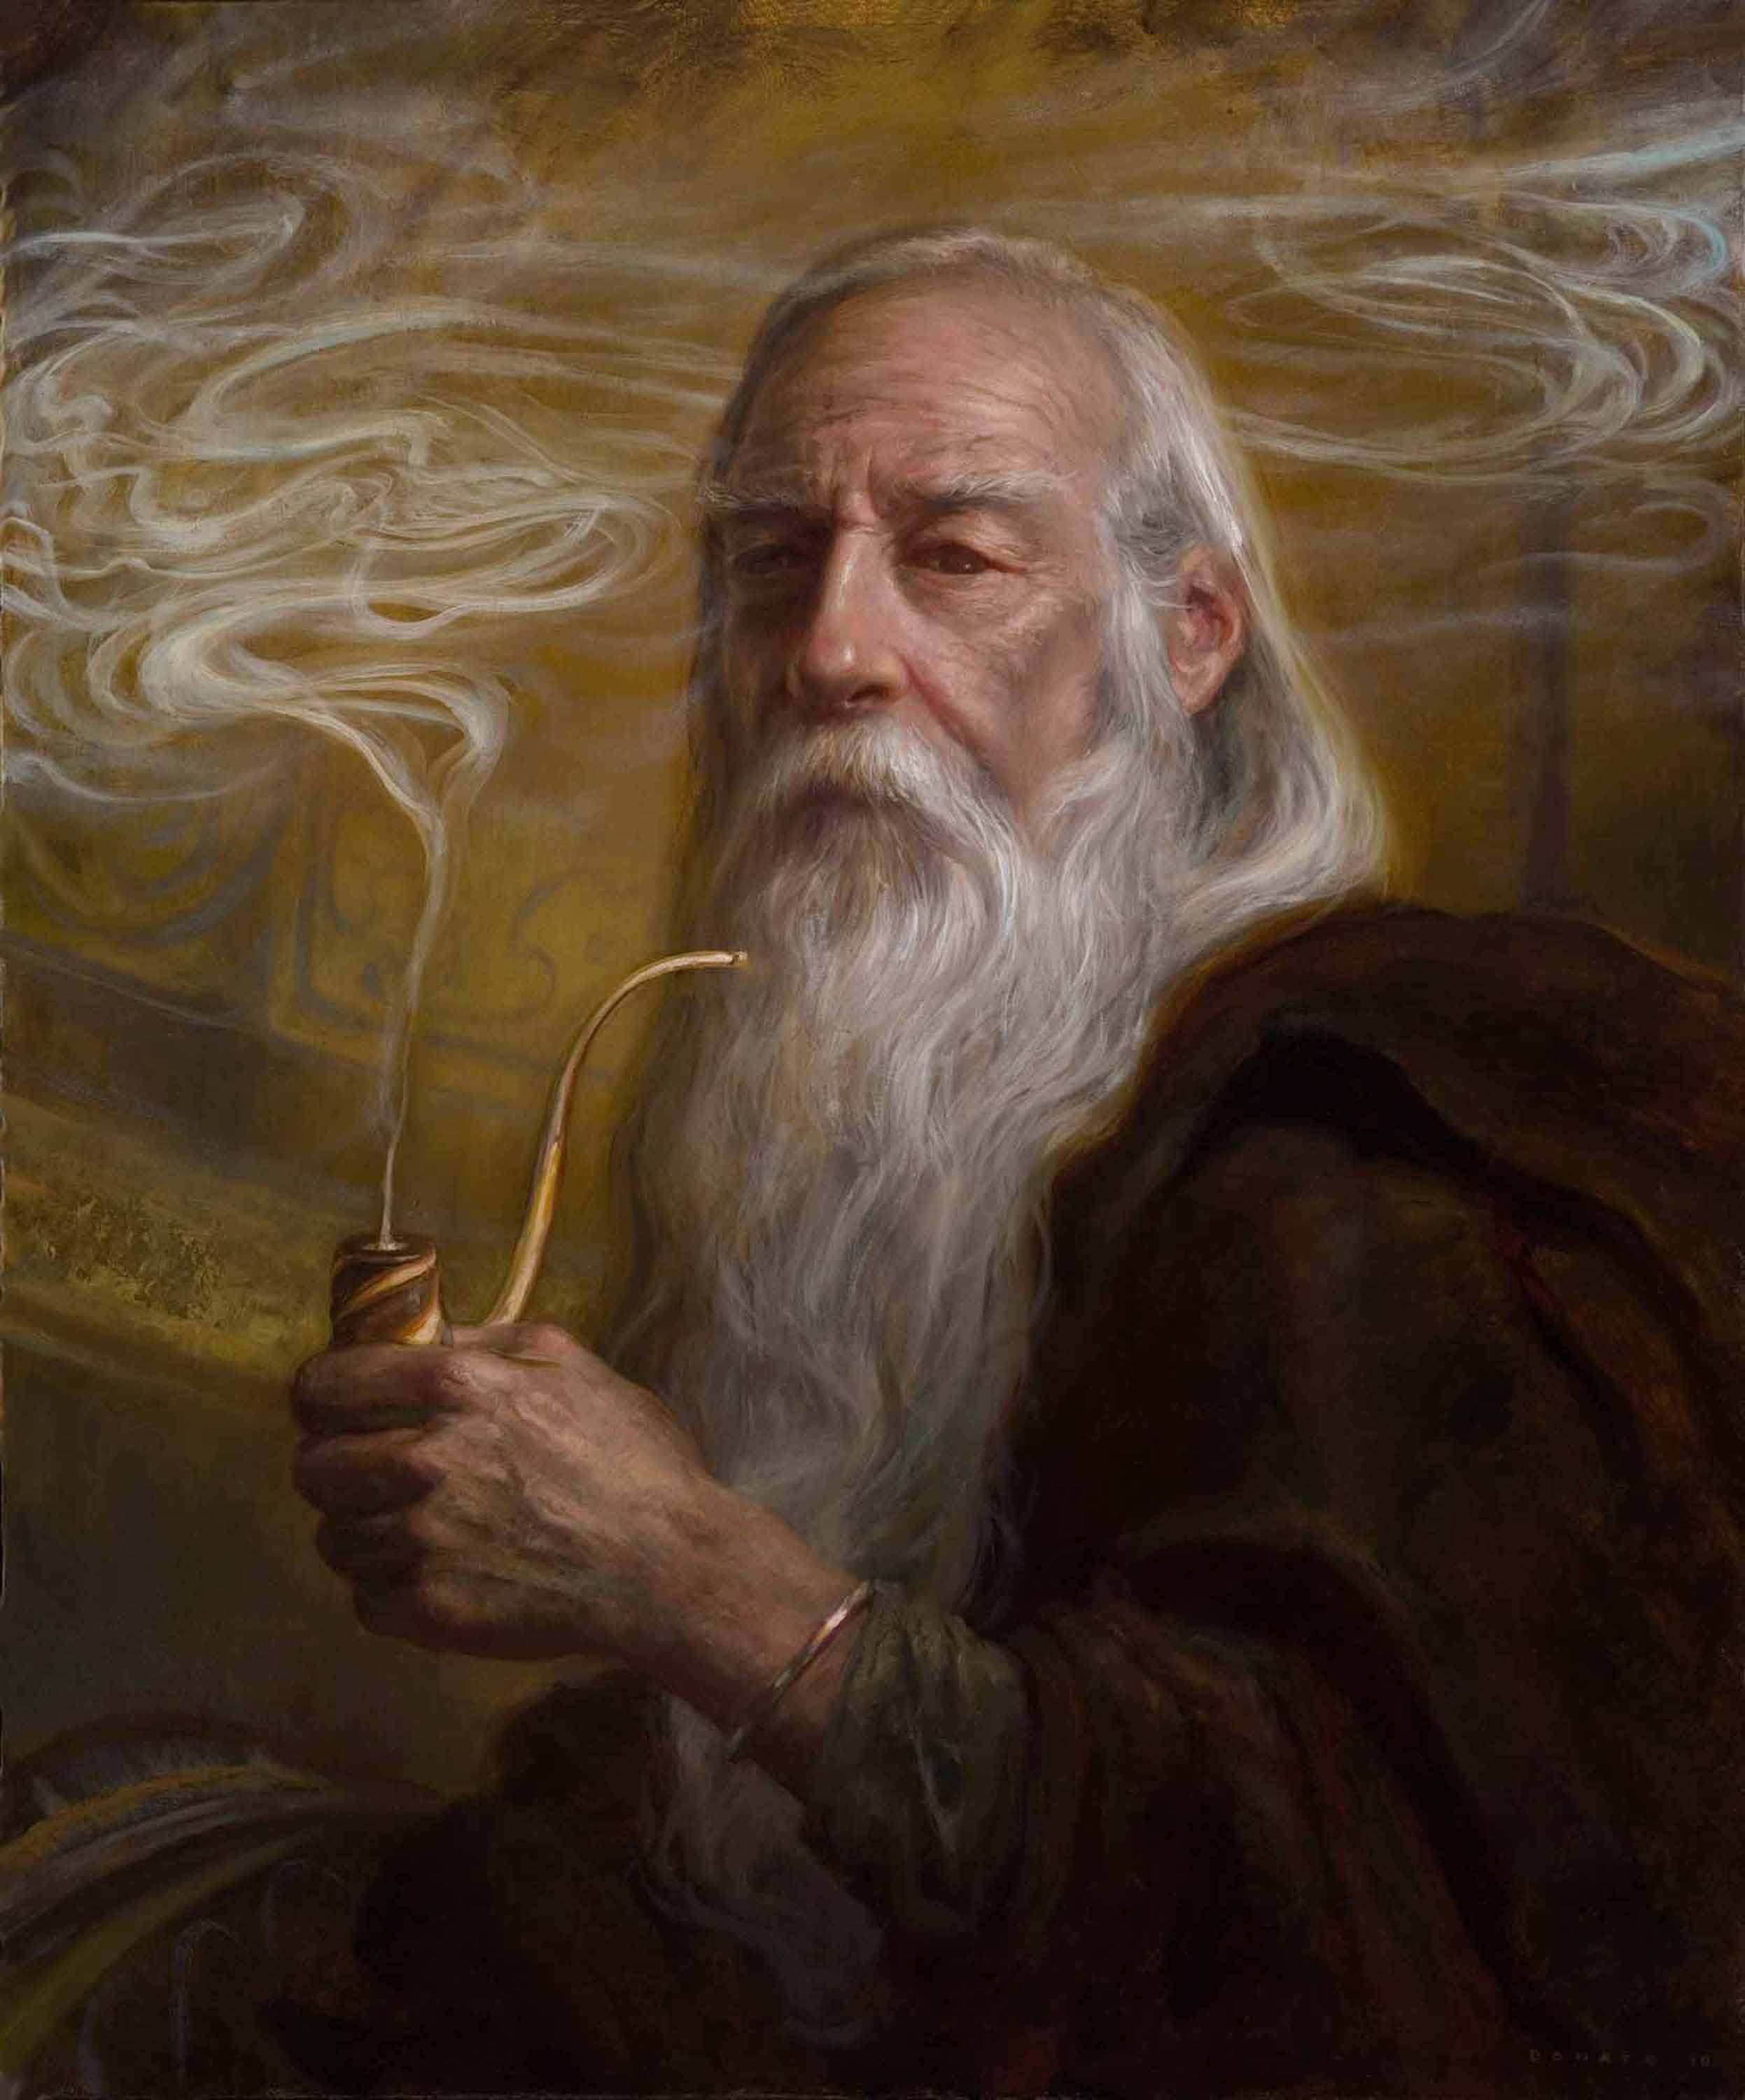 Gandalf at Rivendell
24" x 18"  Oil on Panel 2010
private collection